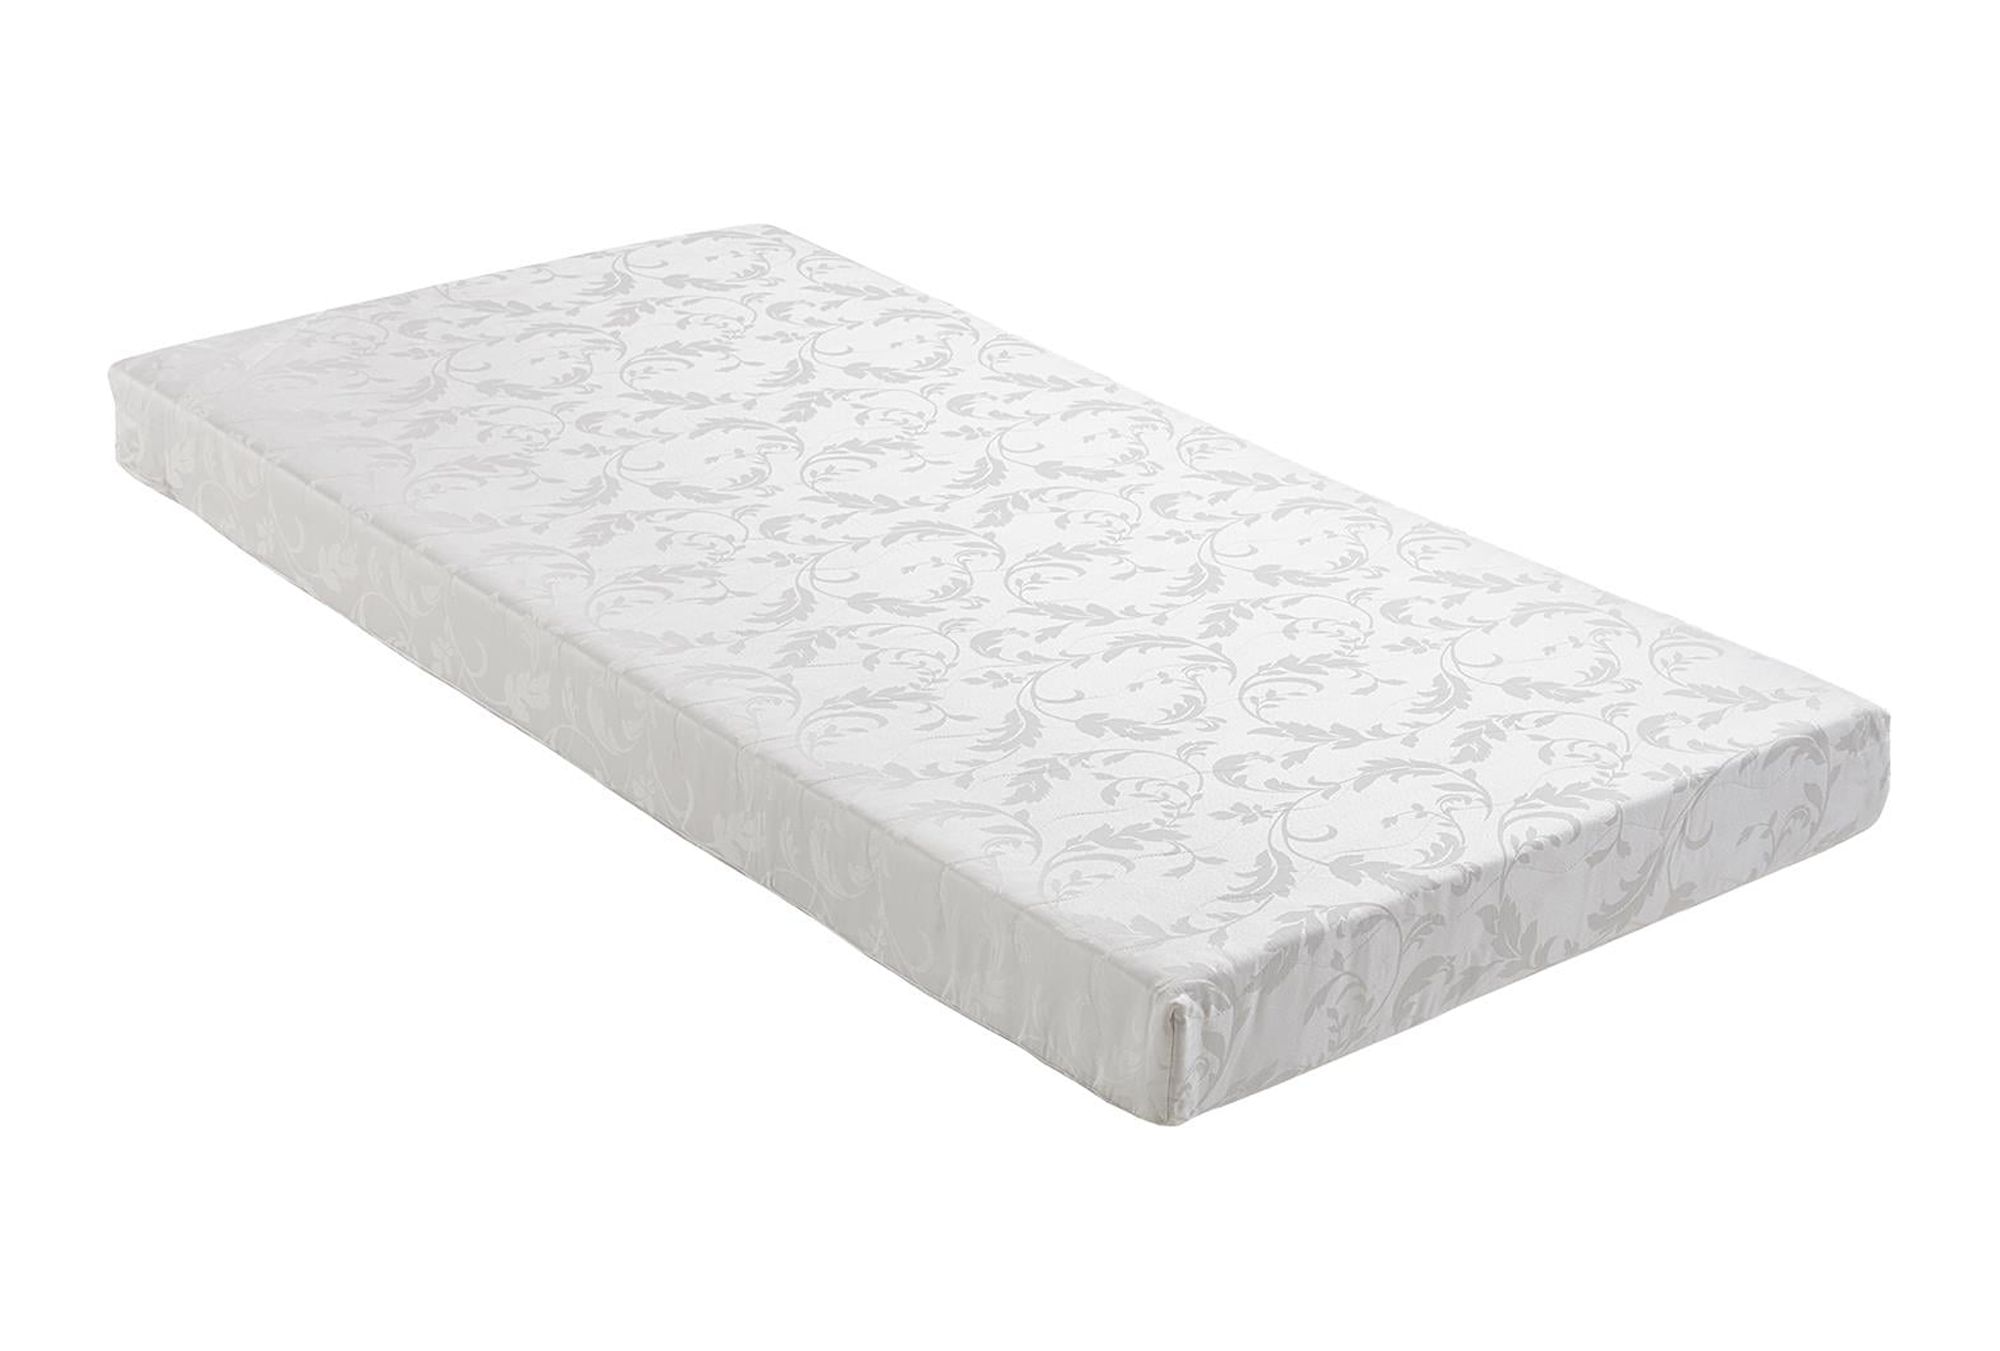 DHP Value 6 Inch Polyester Filled Bunk Bed Mattress with Jacquard Cover, Twin, White - image 3 of 9